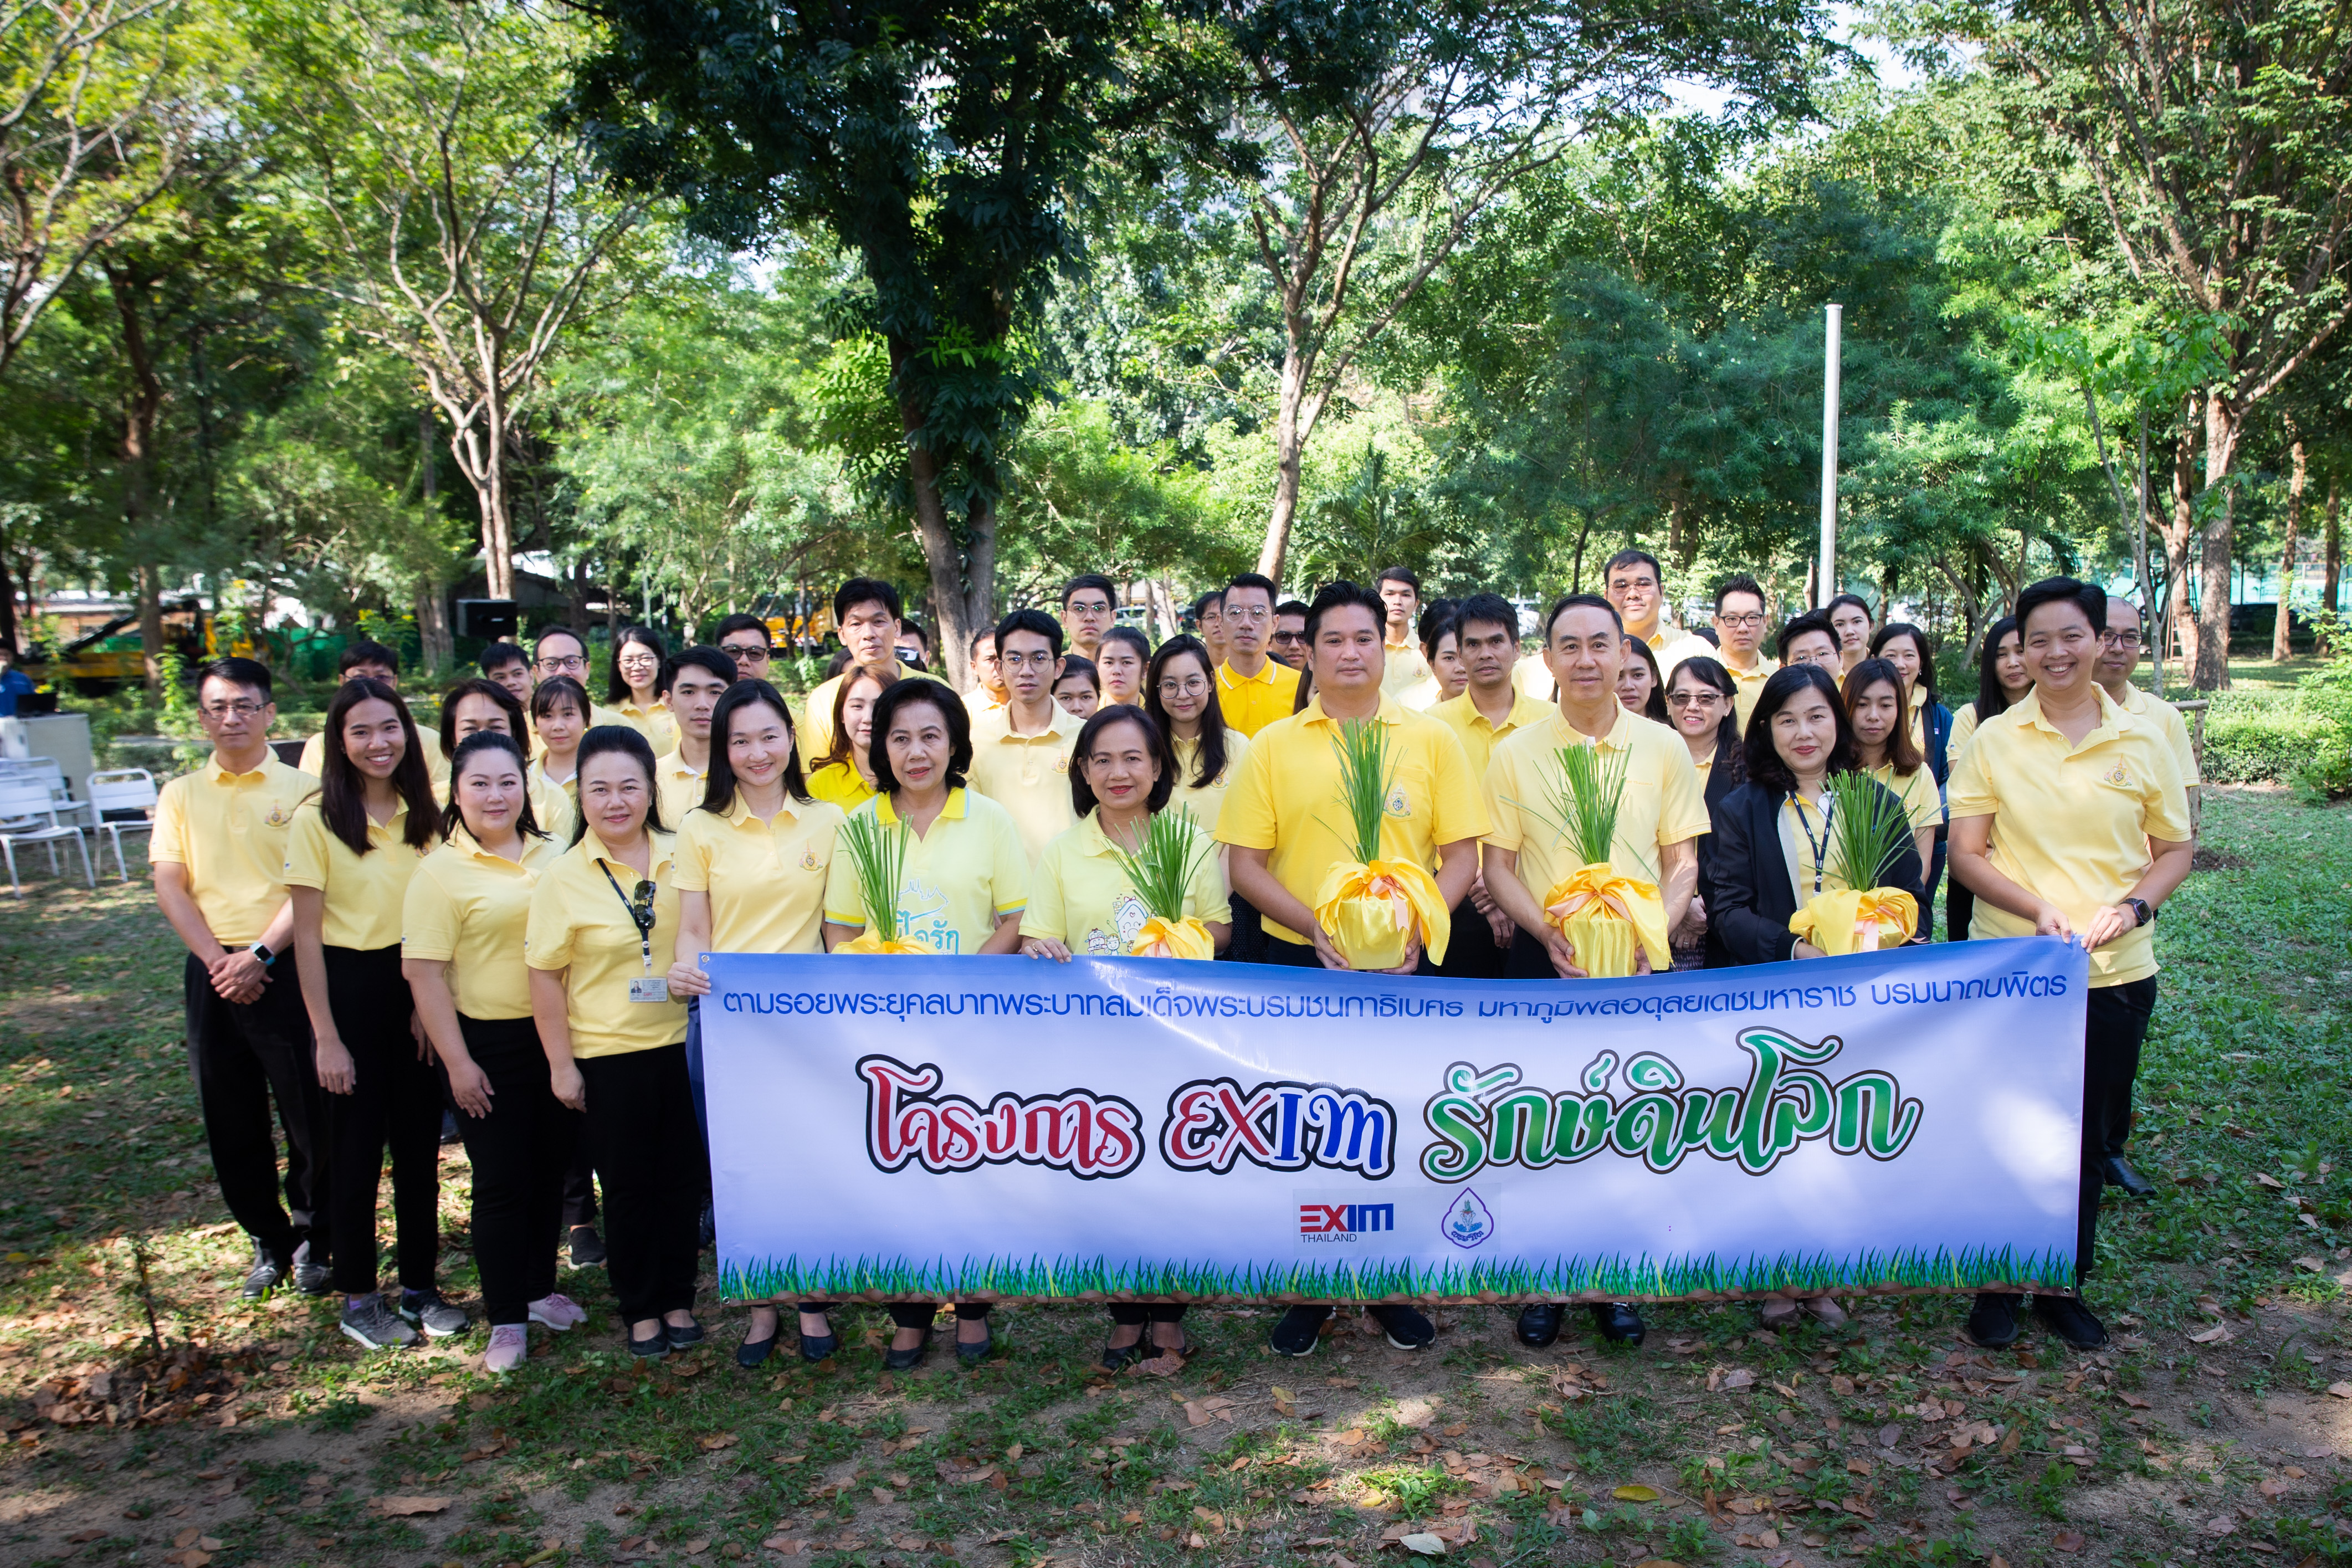 EXIM Thailand Organizes “EXIM World Soil Day”  Following in the Footsteps of His Majesty King Bhumibol Adulyadej The Great  on December 5, 2019